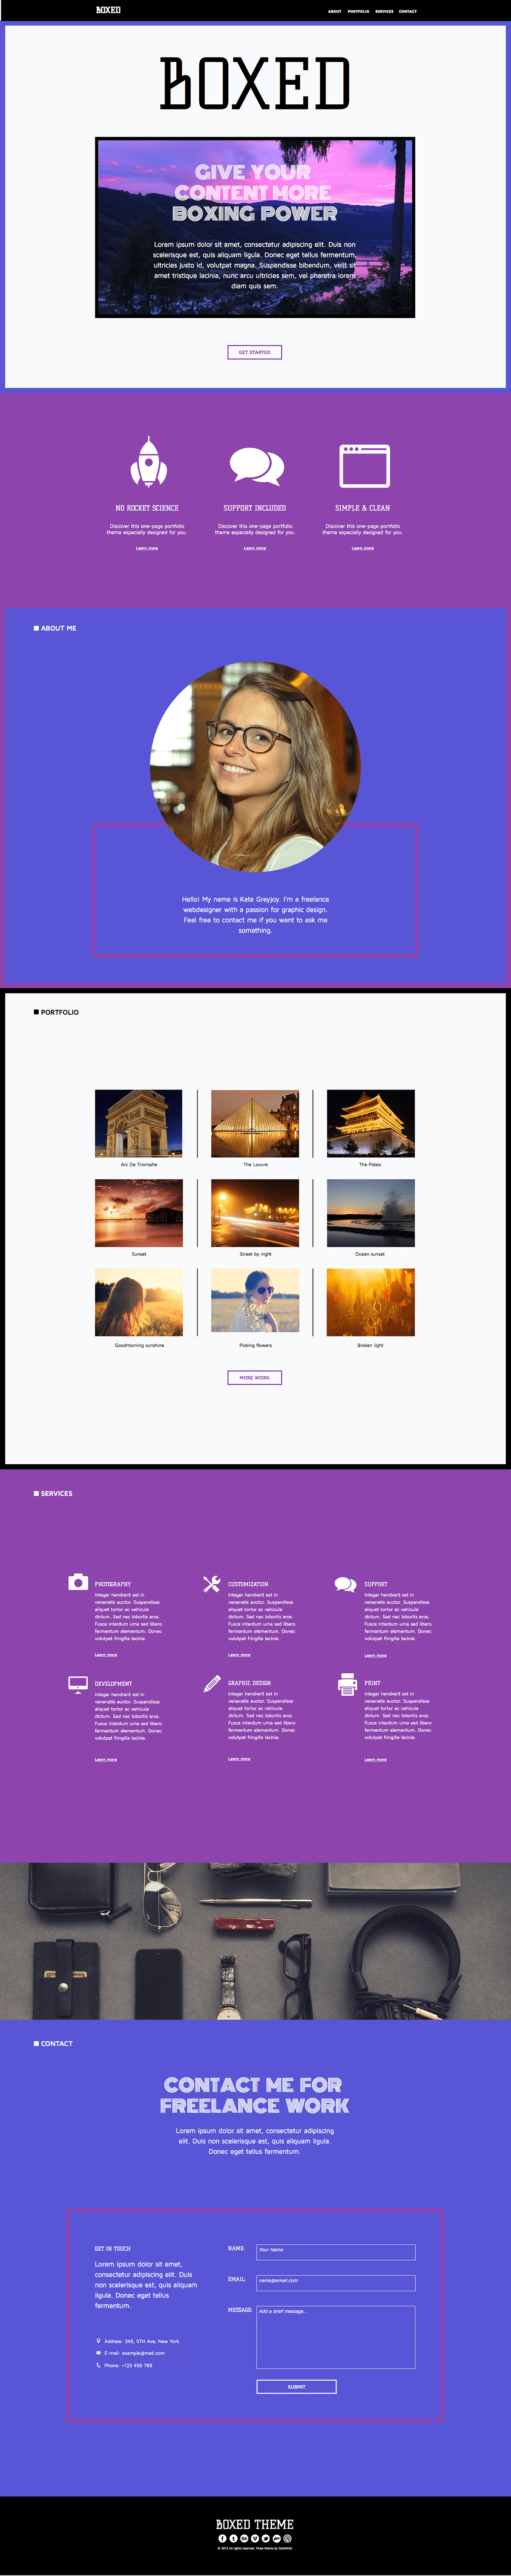 adobe muse bold box boxes cadre frame framework muse template muse theme One Page onepage Powerful purple stylewish